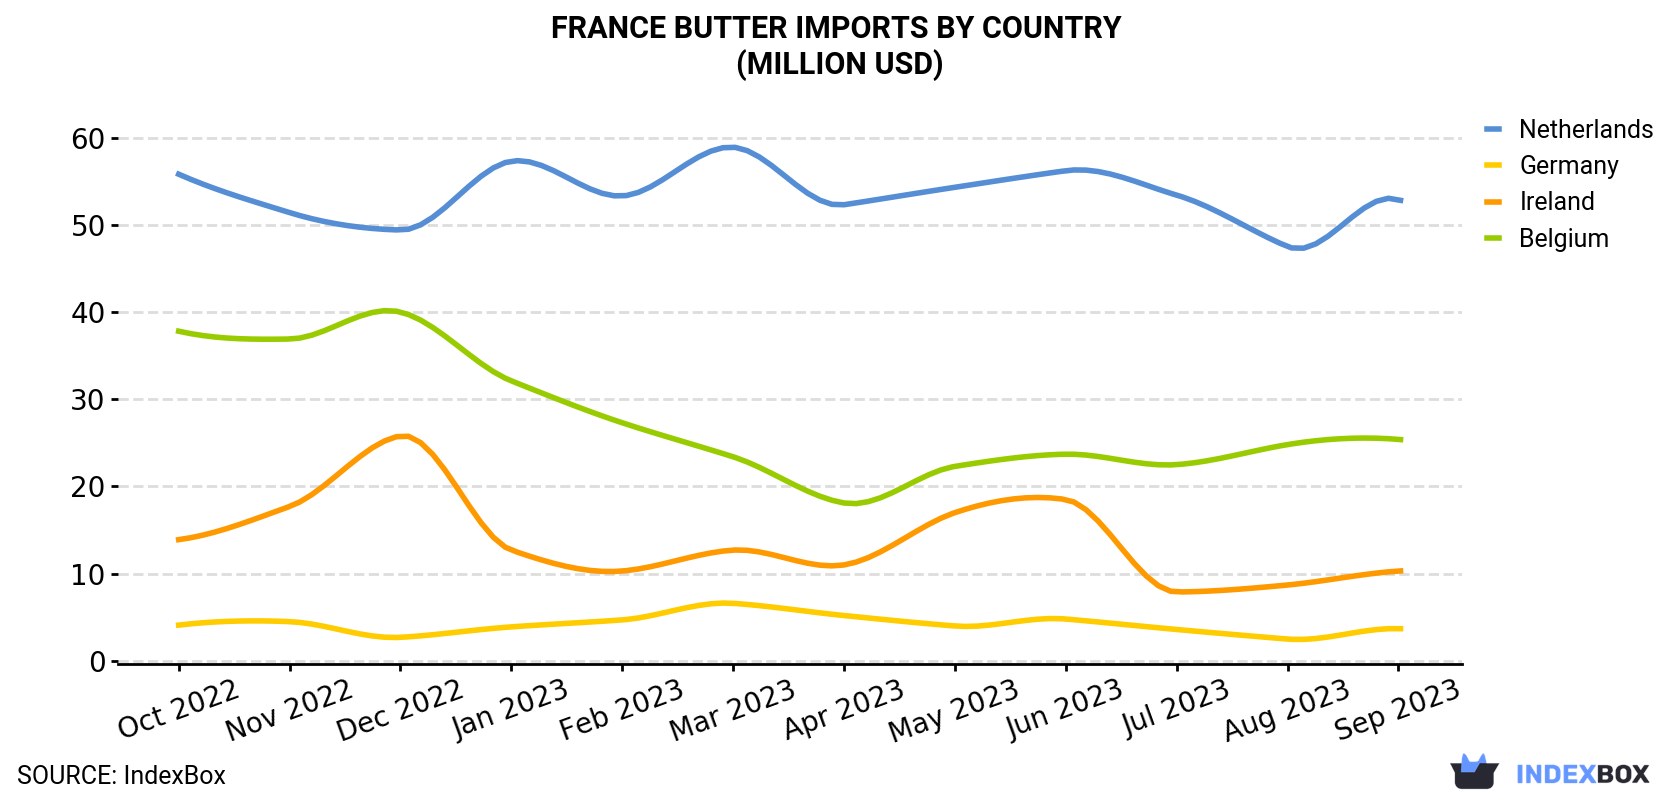 France Butter Imports By Country (Million USD)